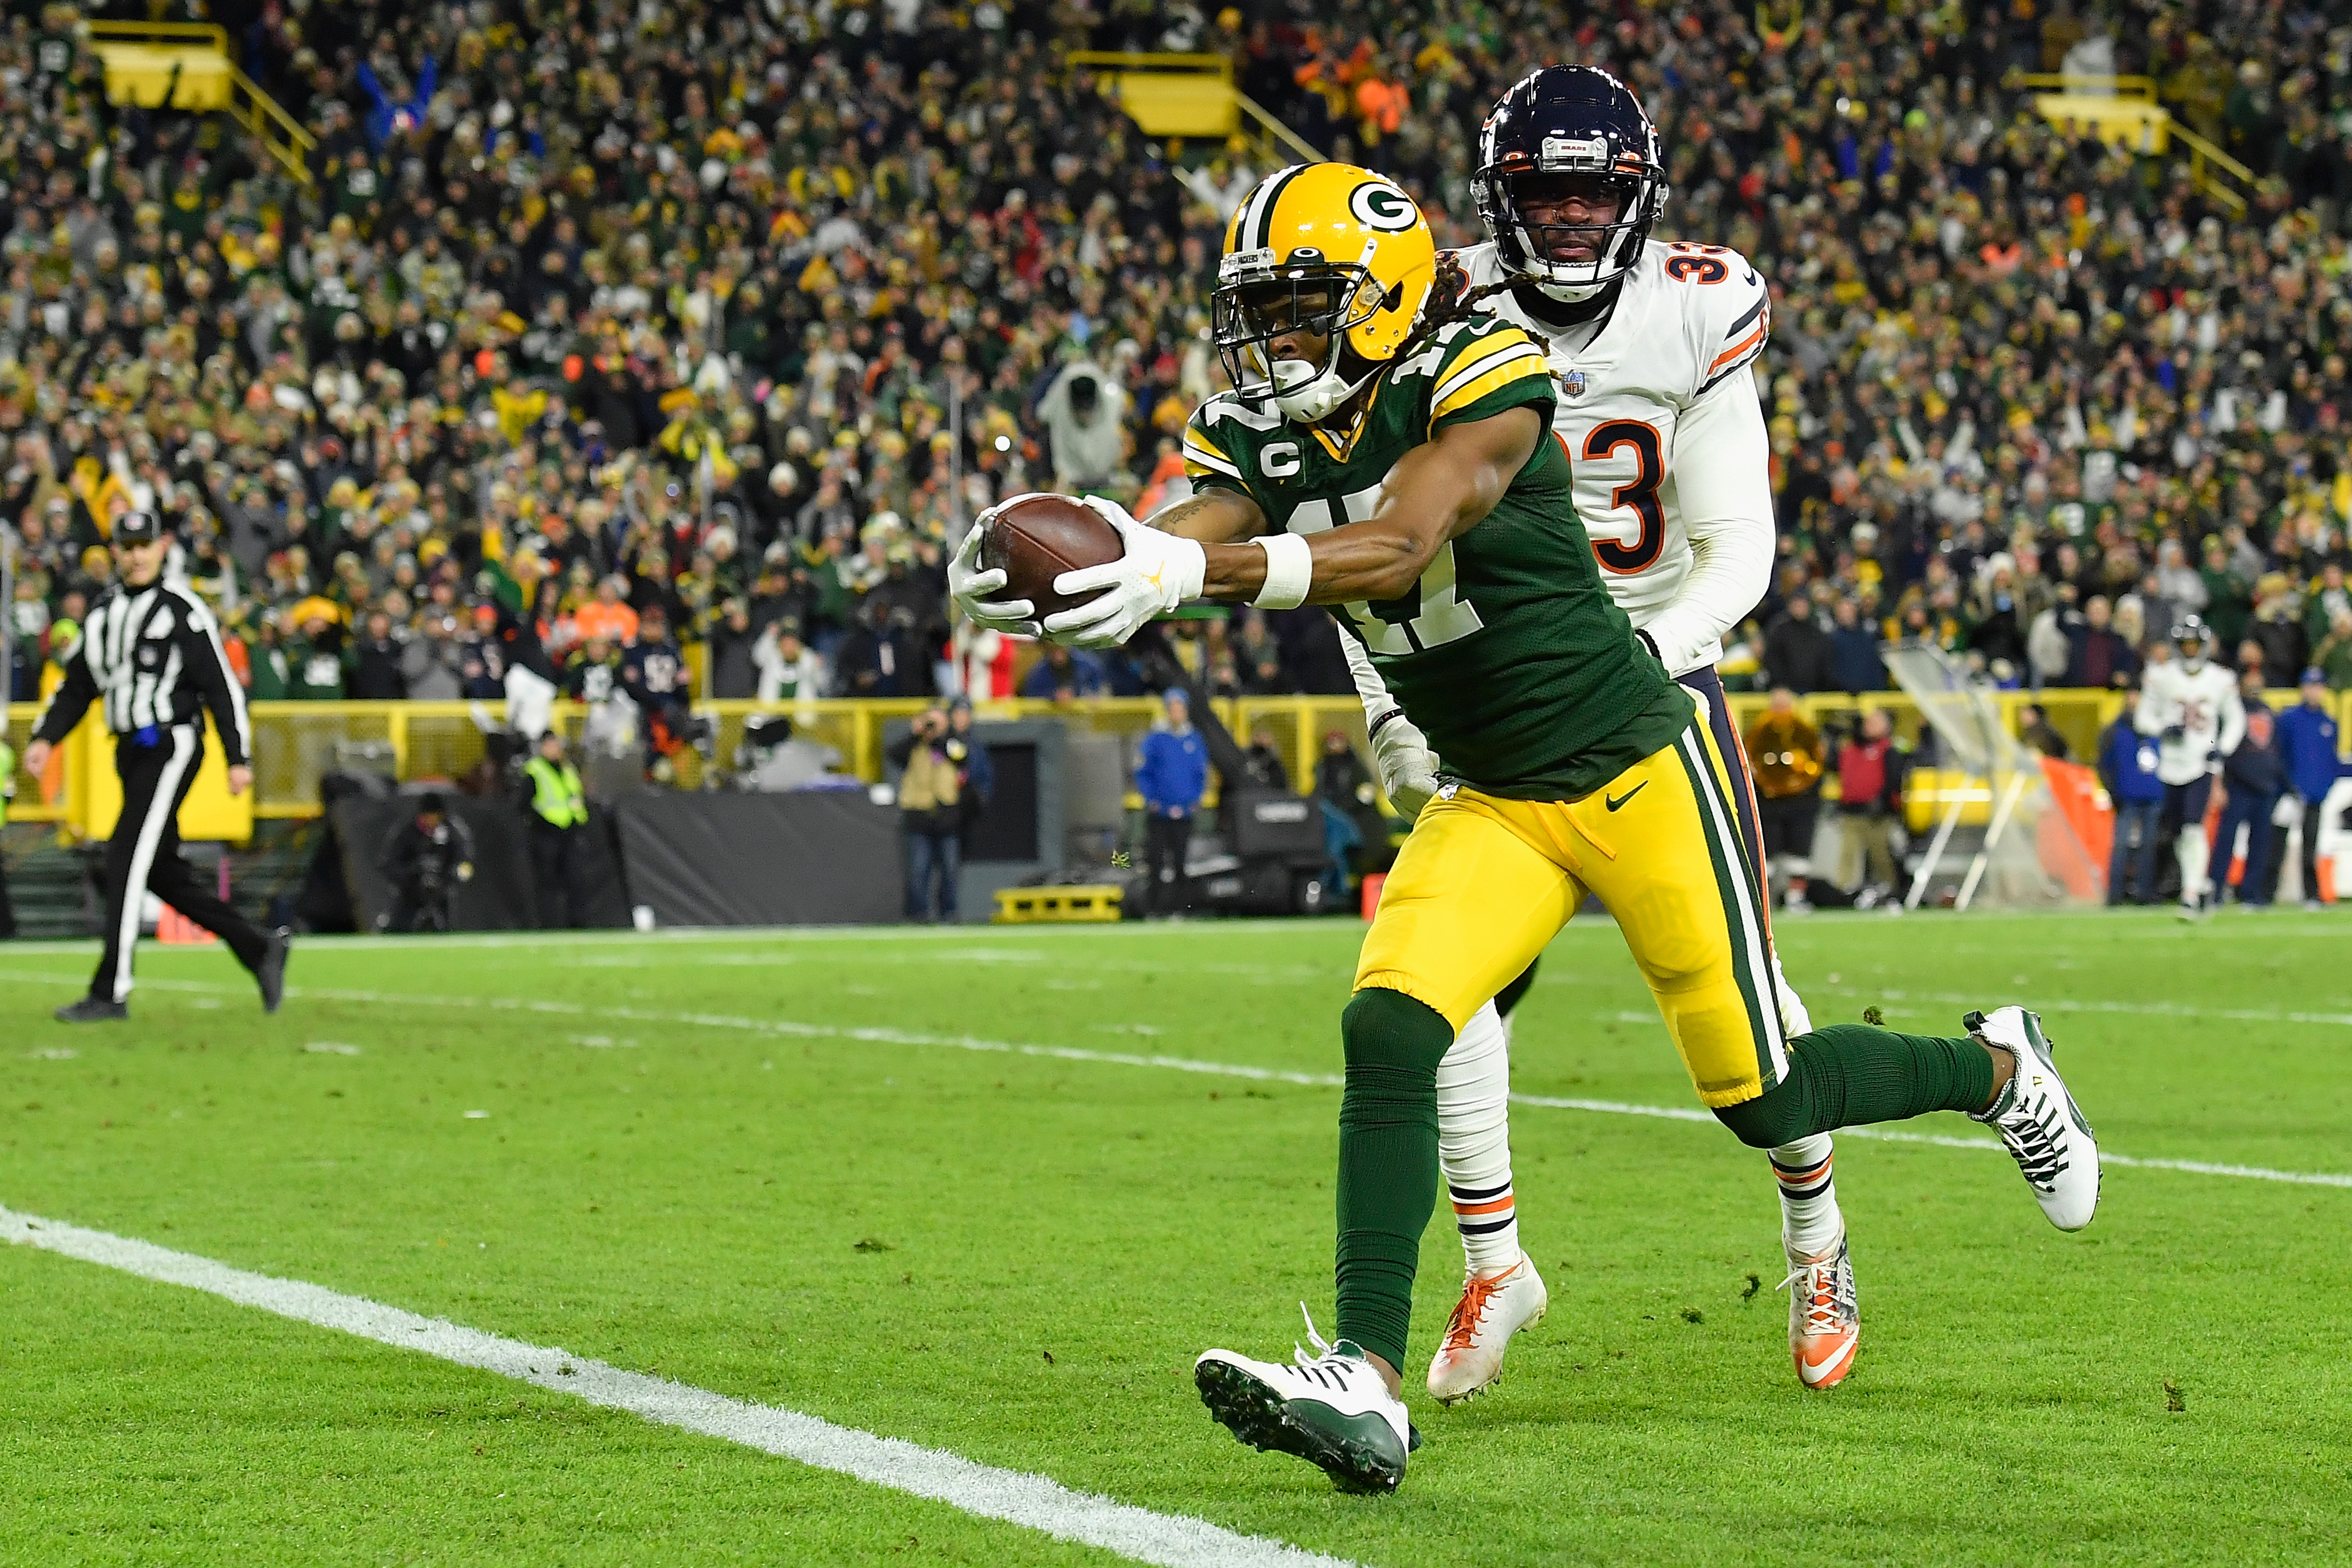 Davante Adams scores a touchdown for the Green Bay Packers Sunday night